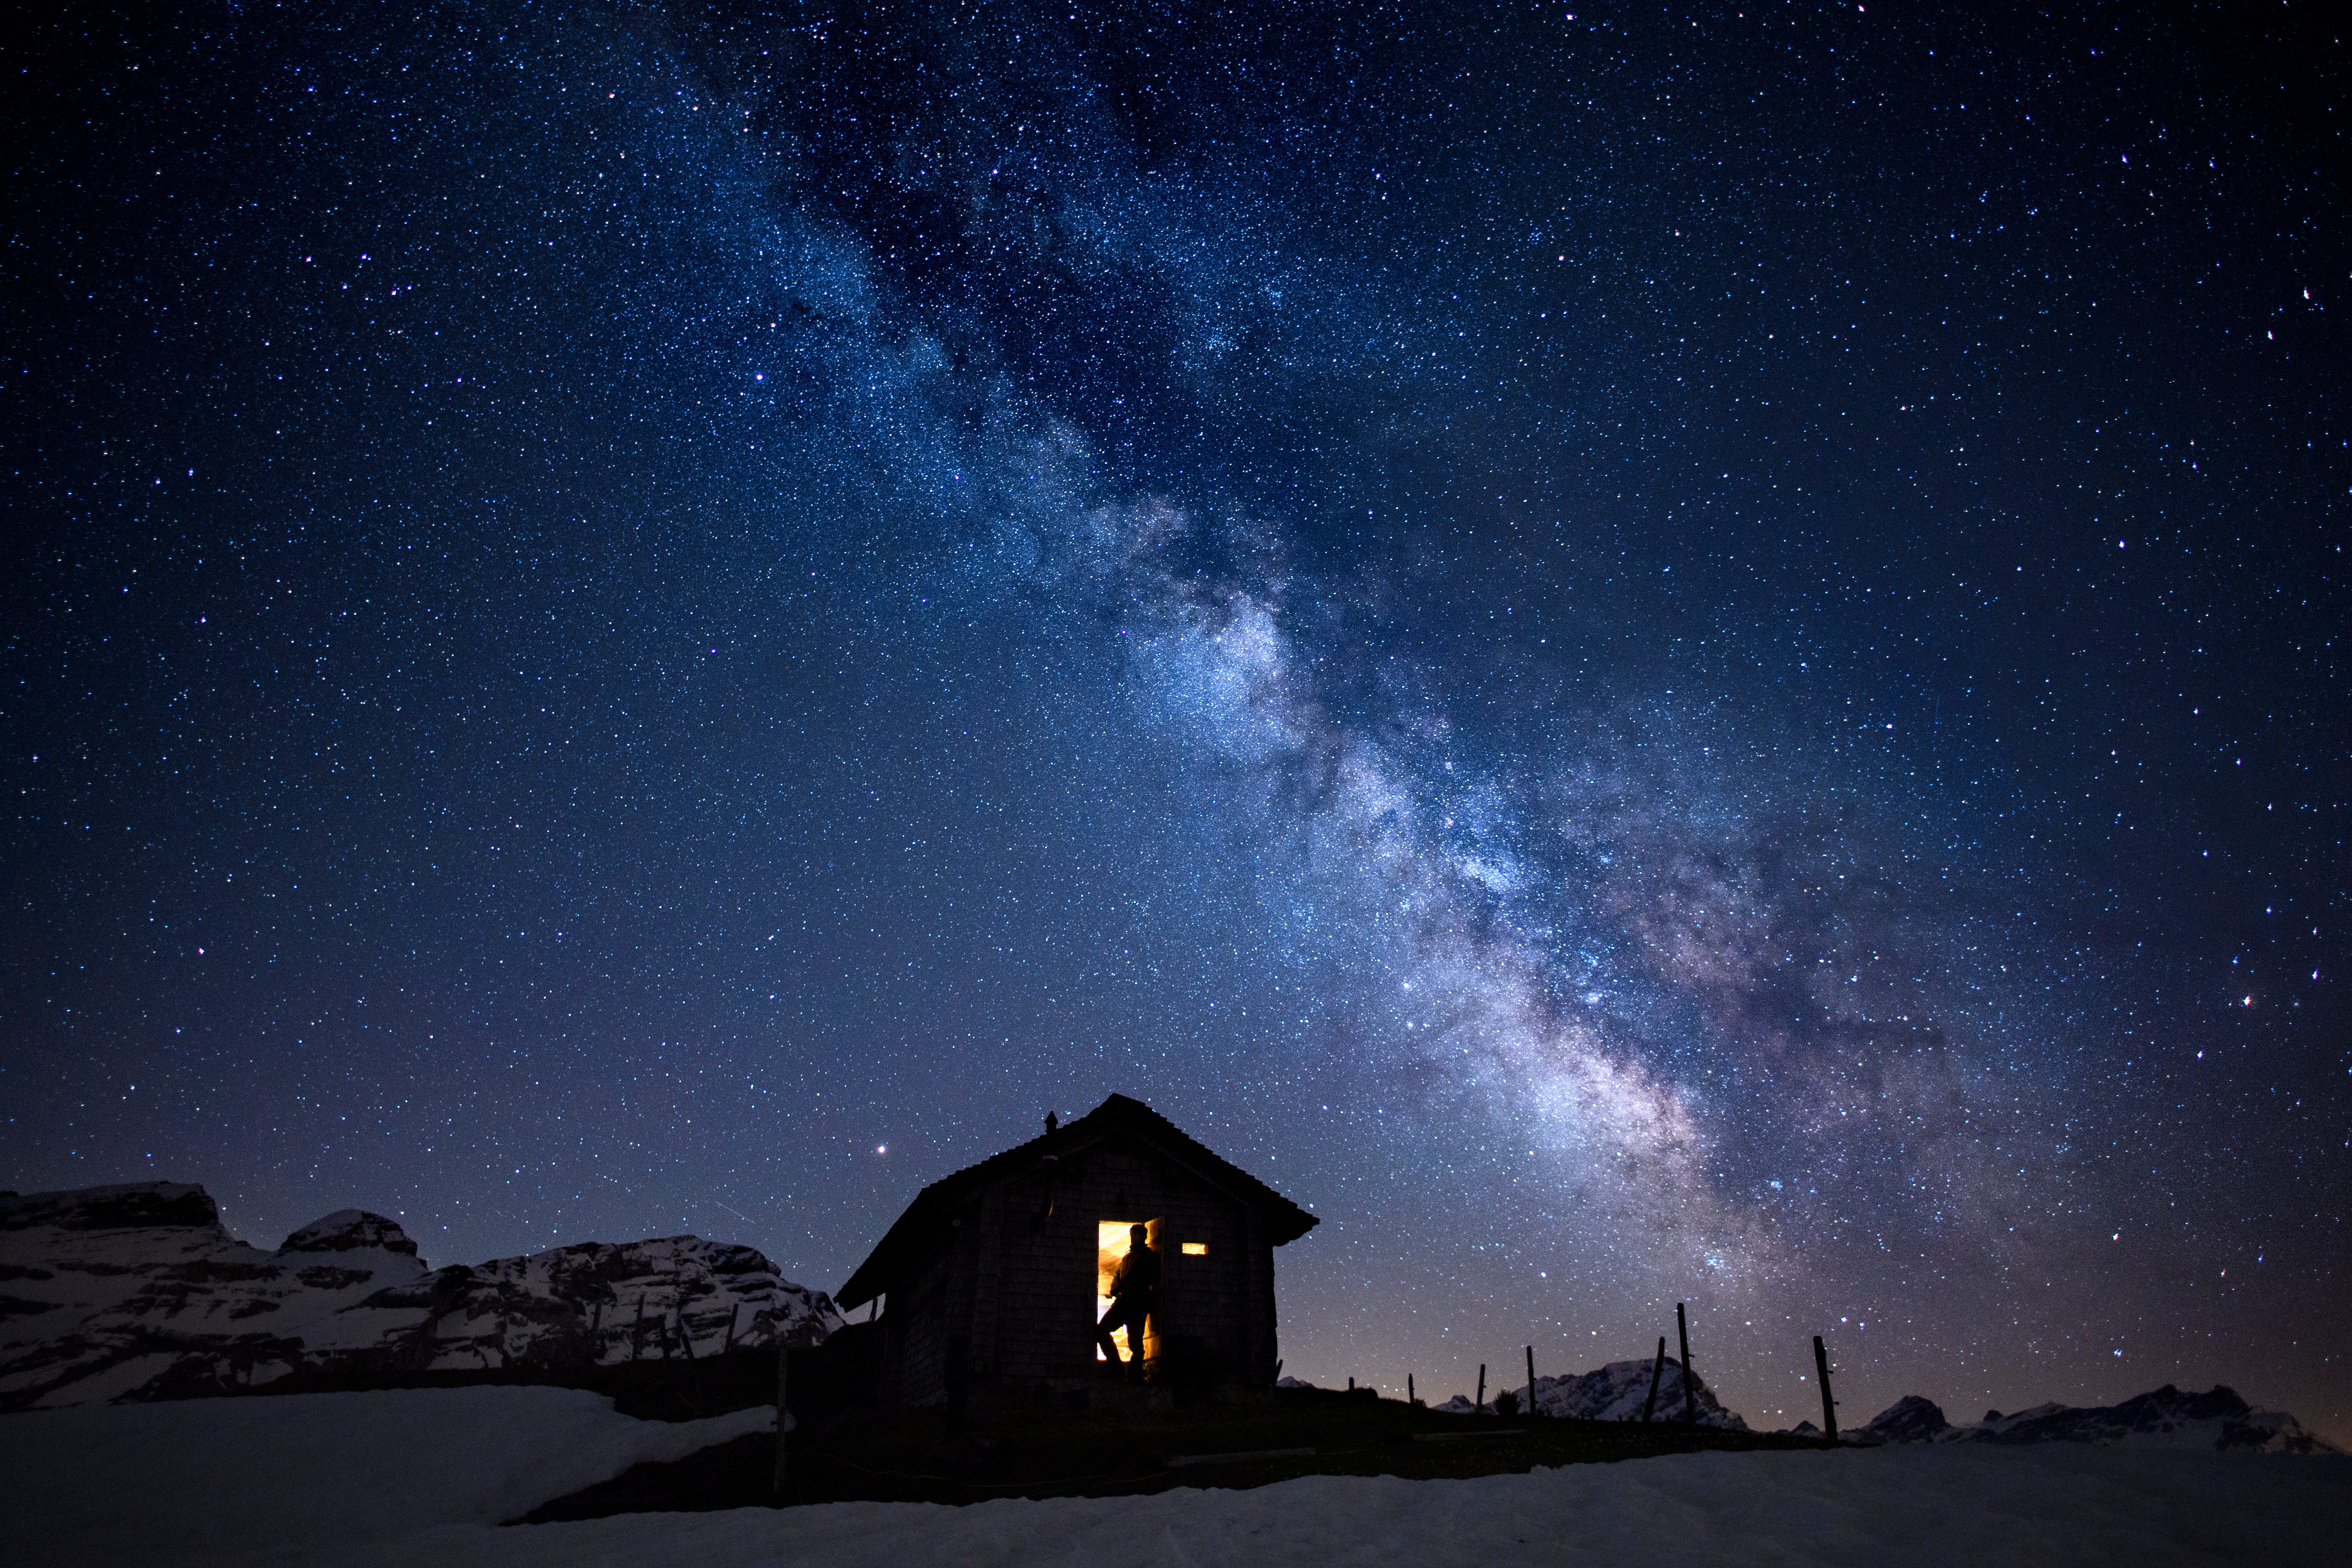 A man is silhouetted against the illuminated inside of a small cabin with a view of the 'Milky Way'  galaxy in the sky over the Ormont Valley, Switzerland.